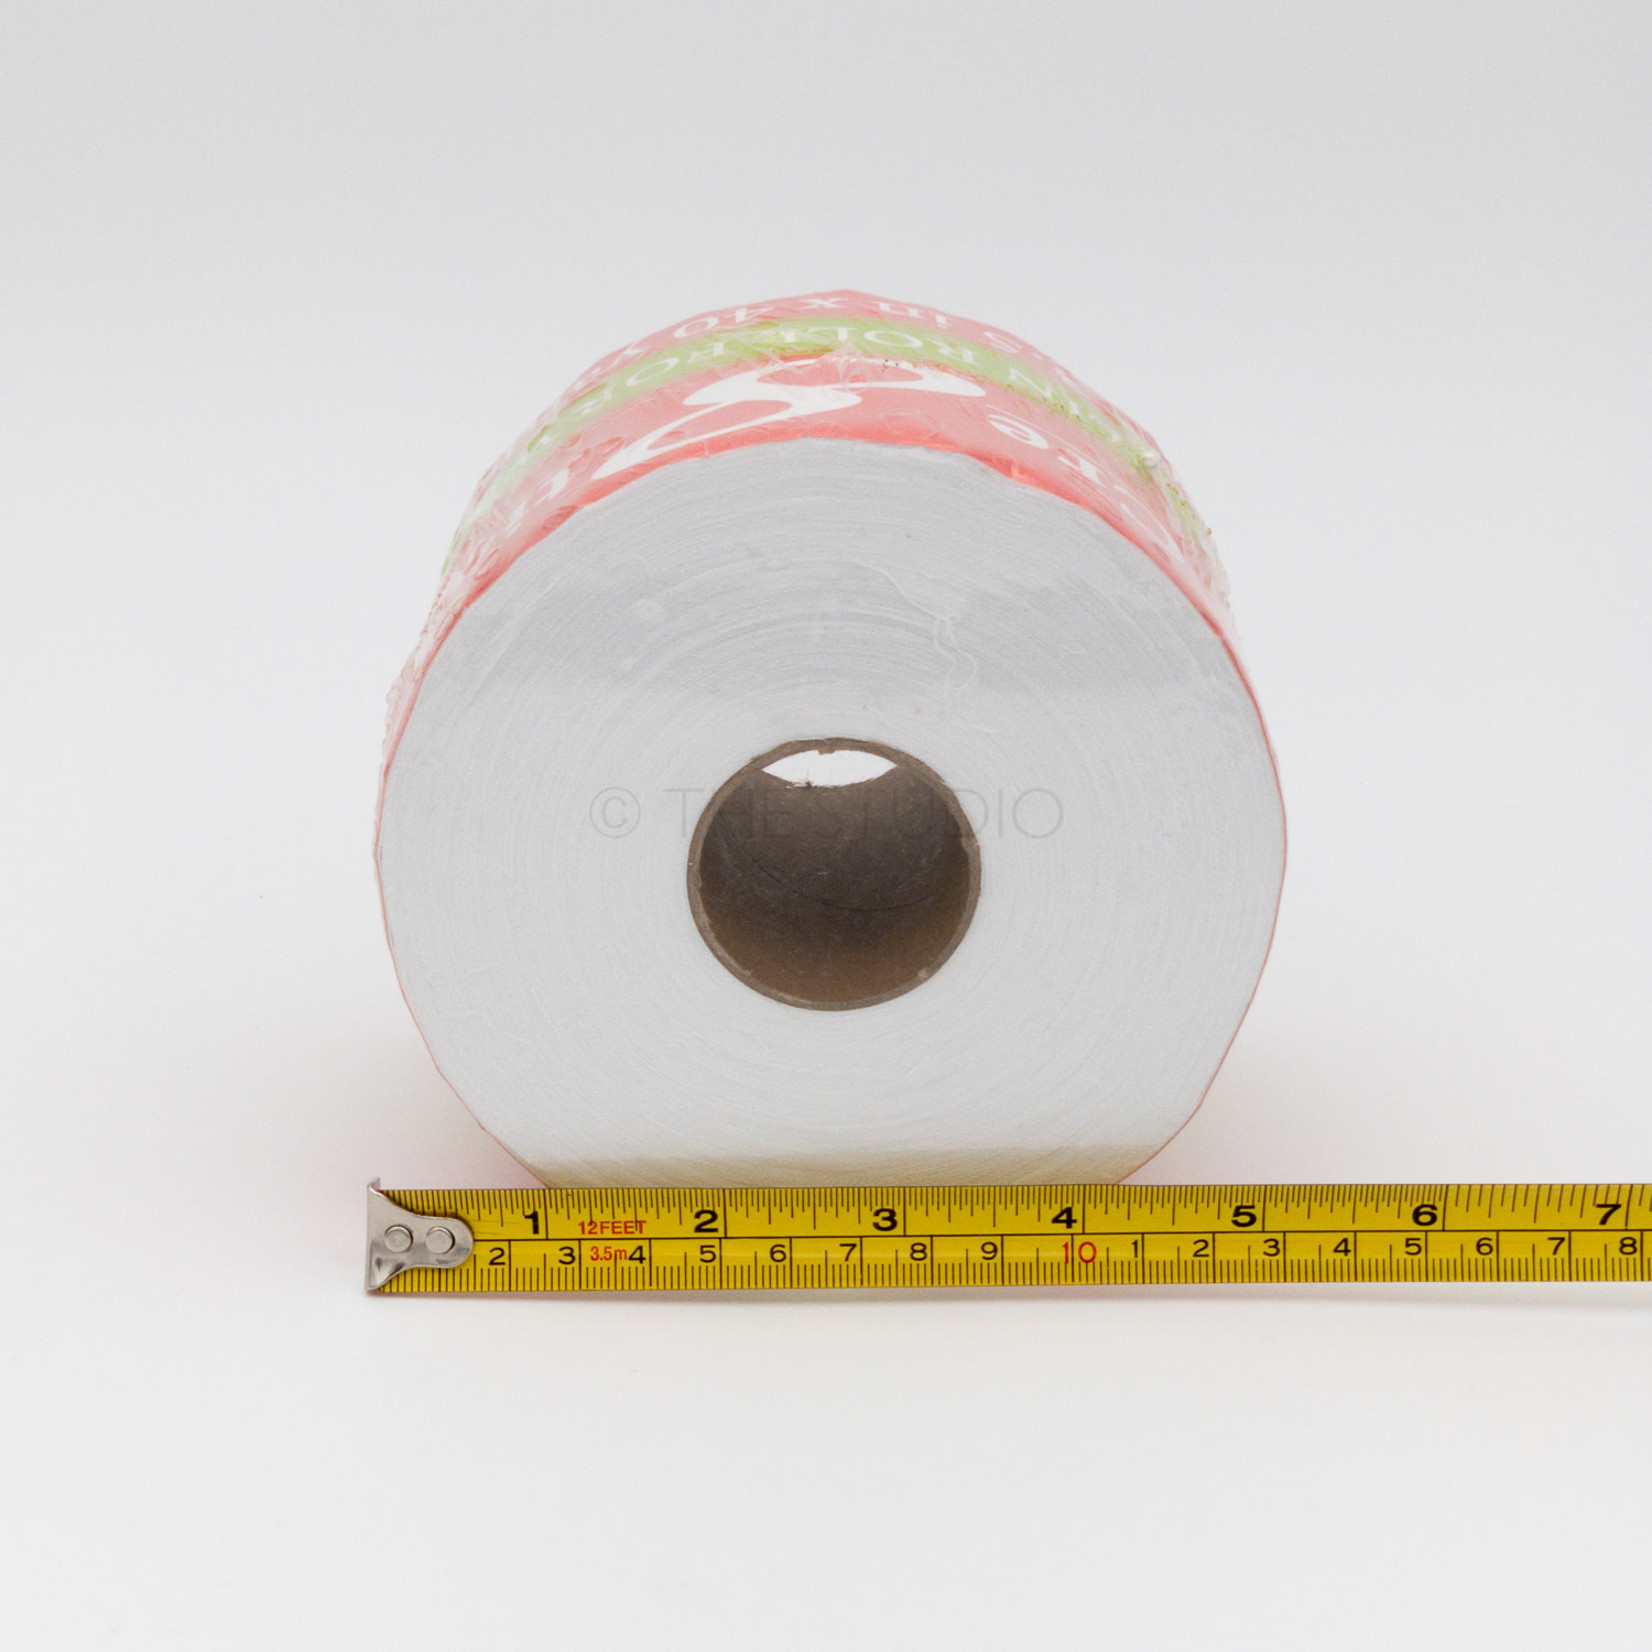 Cre8tion Cre8tion - Muslin Roll for Waxing - 3.5" x 40 yards  ORANGE LABEL